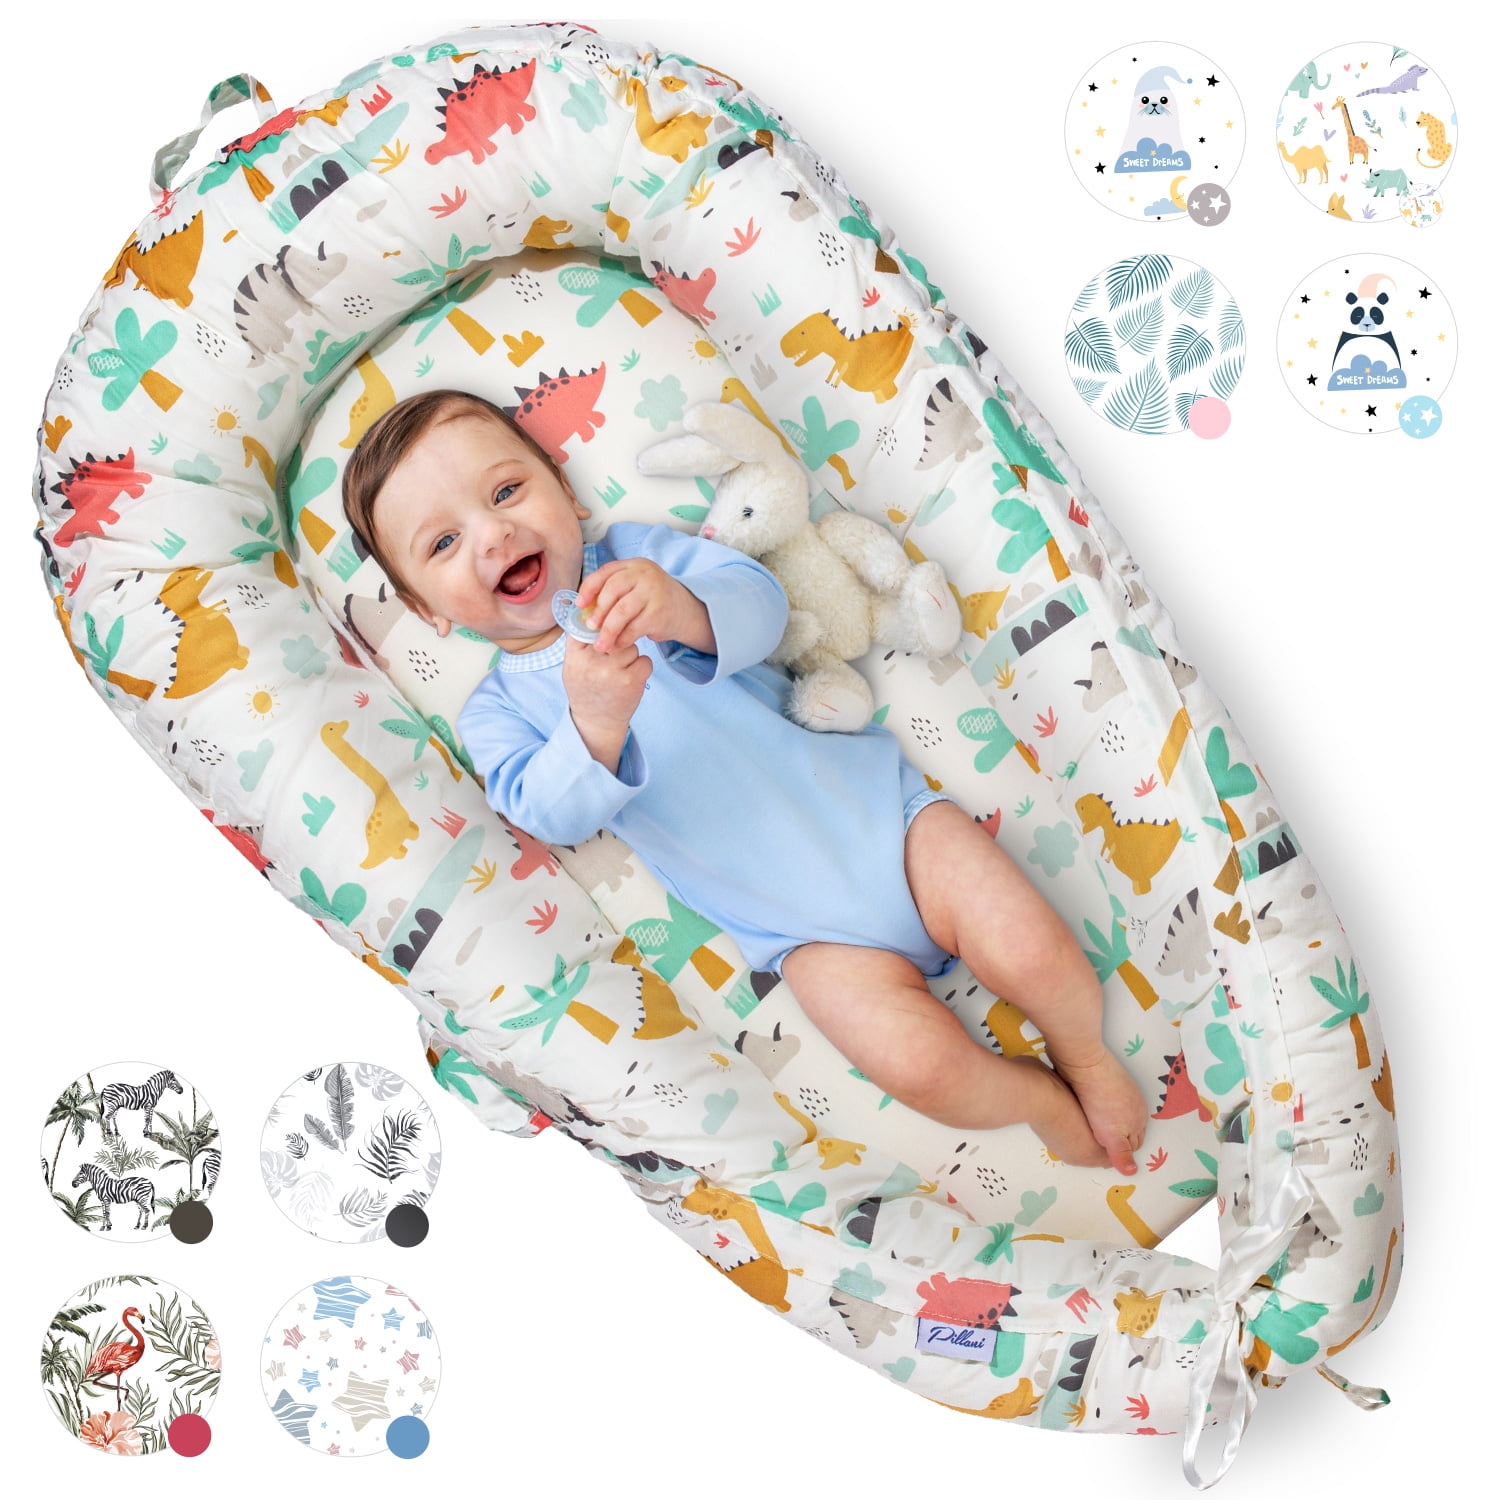 Mamibaby Baby Lounger - Portable Adjustable Infant Floor Seat